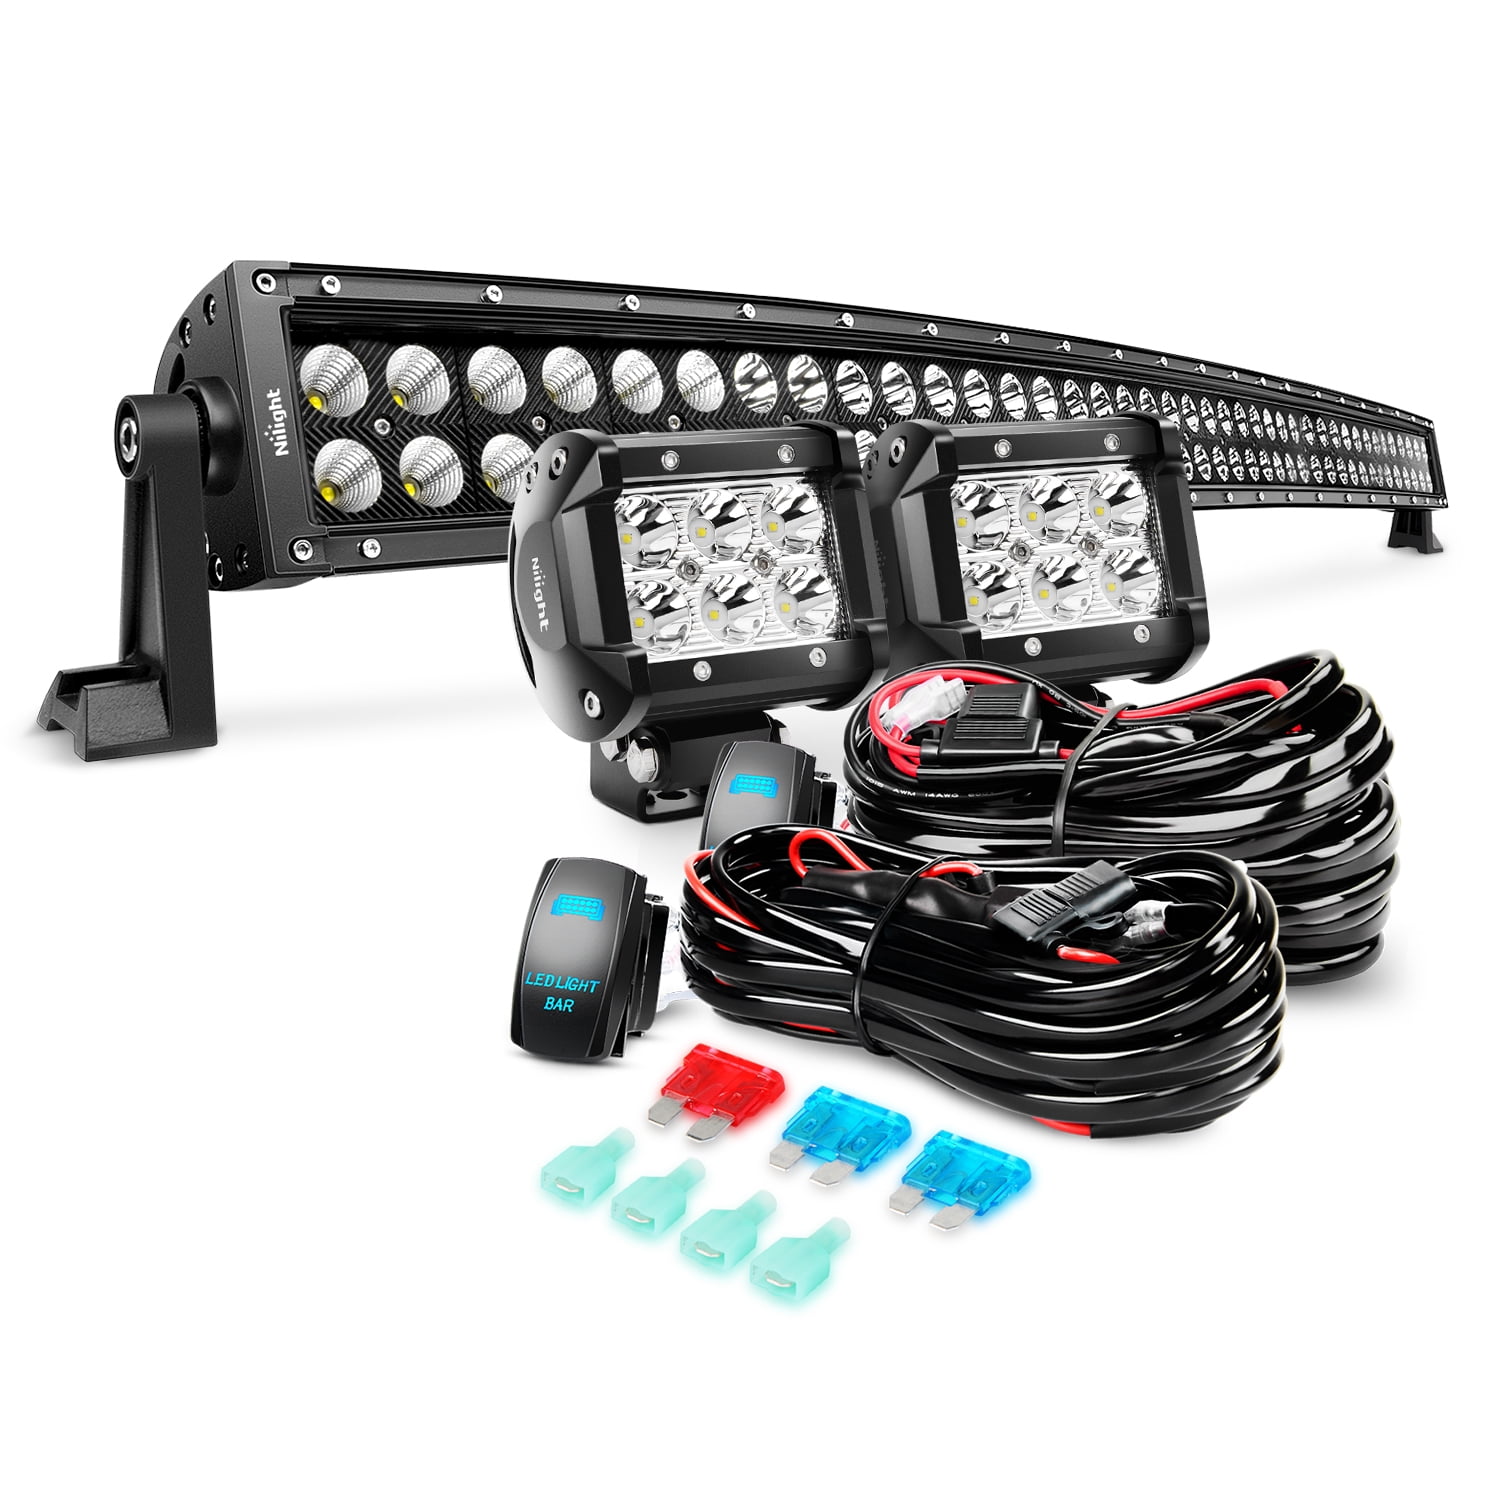 4D 240W 42''inch Curved LED Offroad Light Bar Combo CREE Truck Boat ATV JEEP 44 